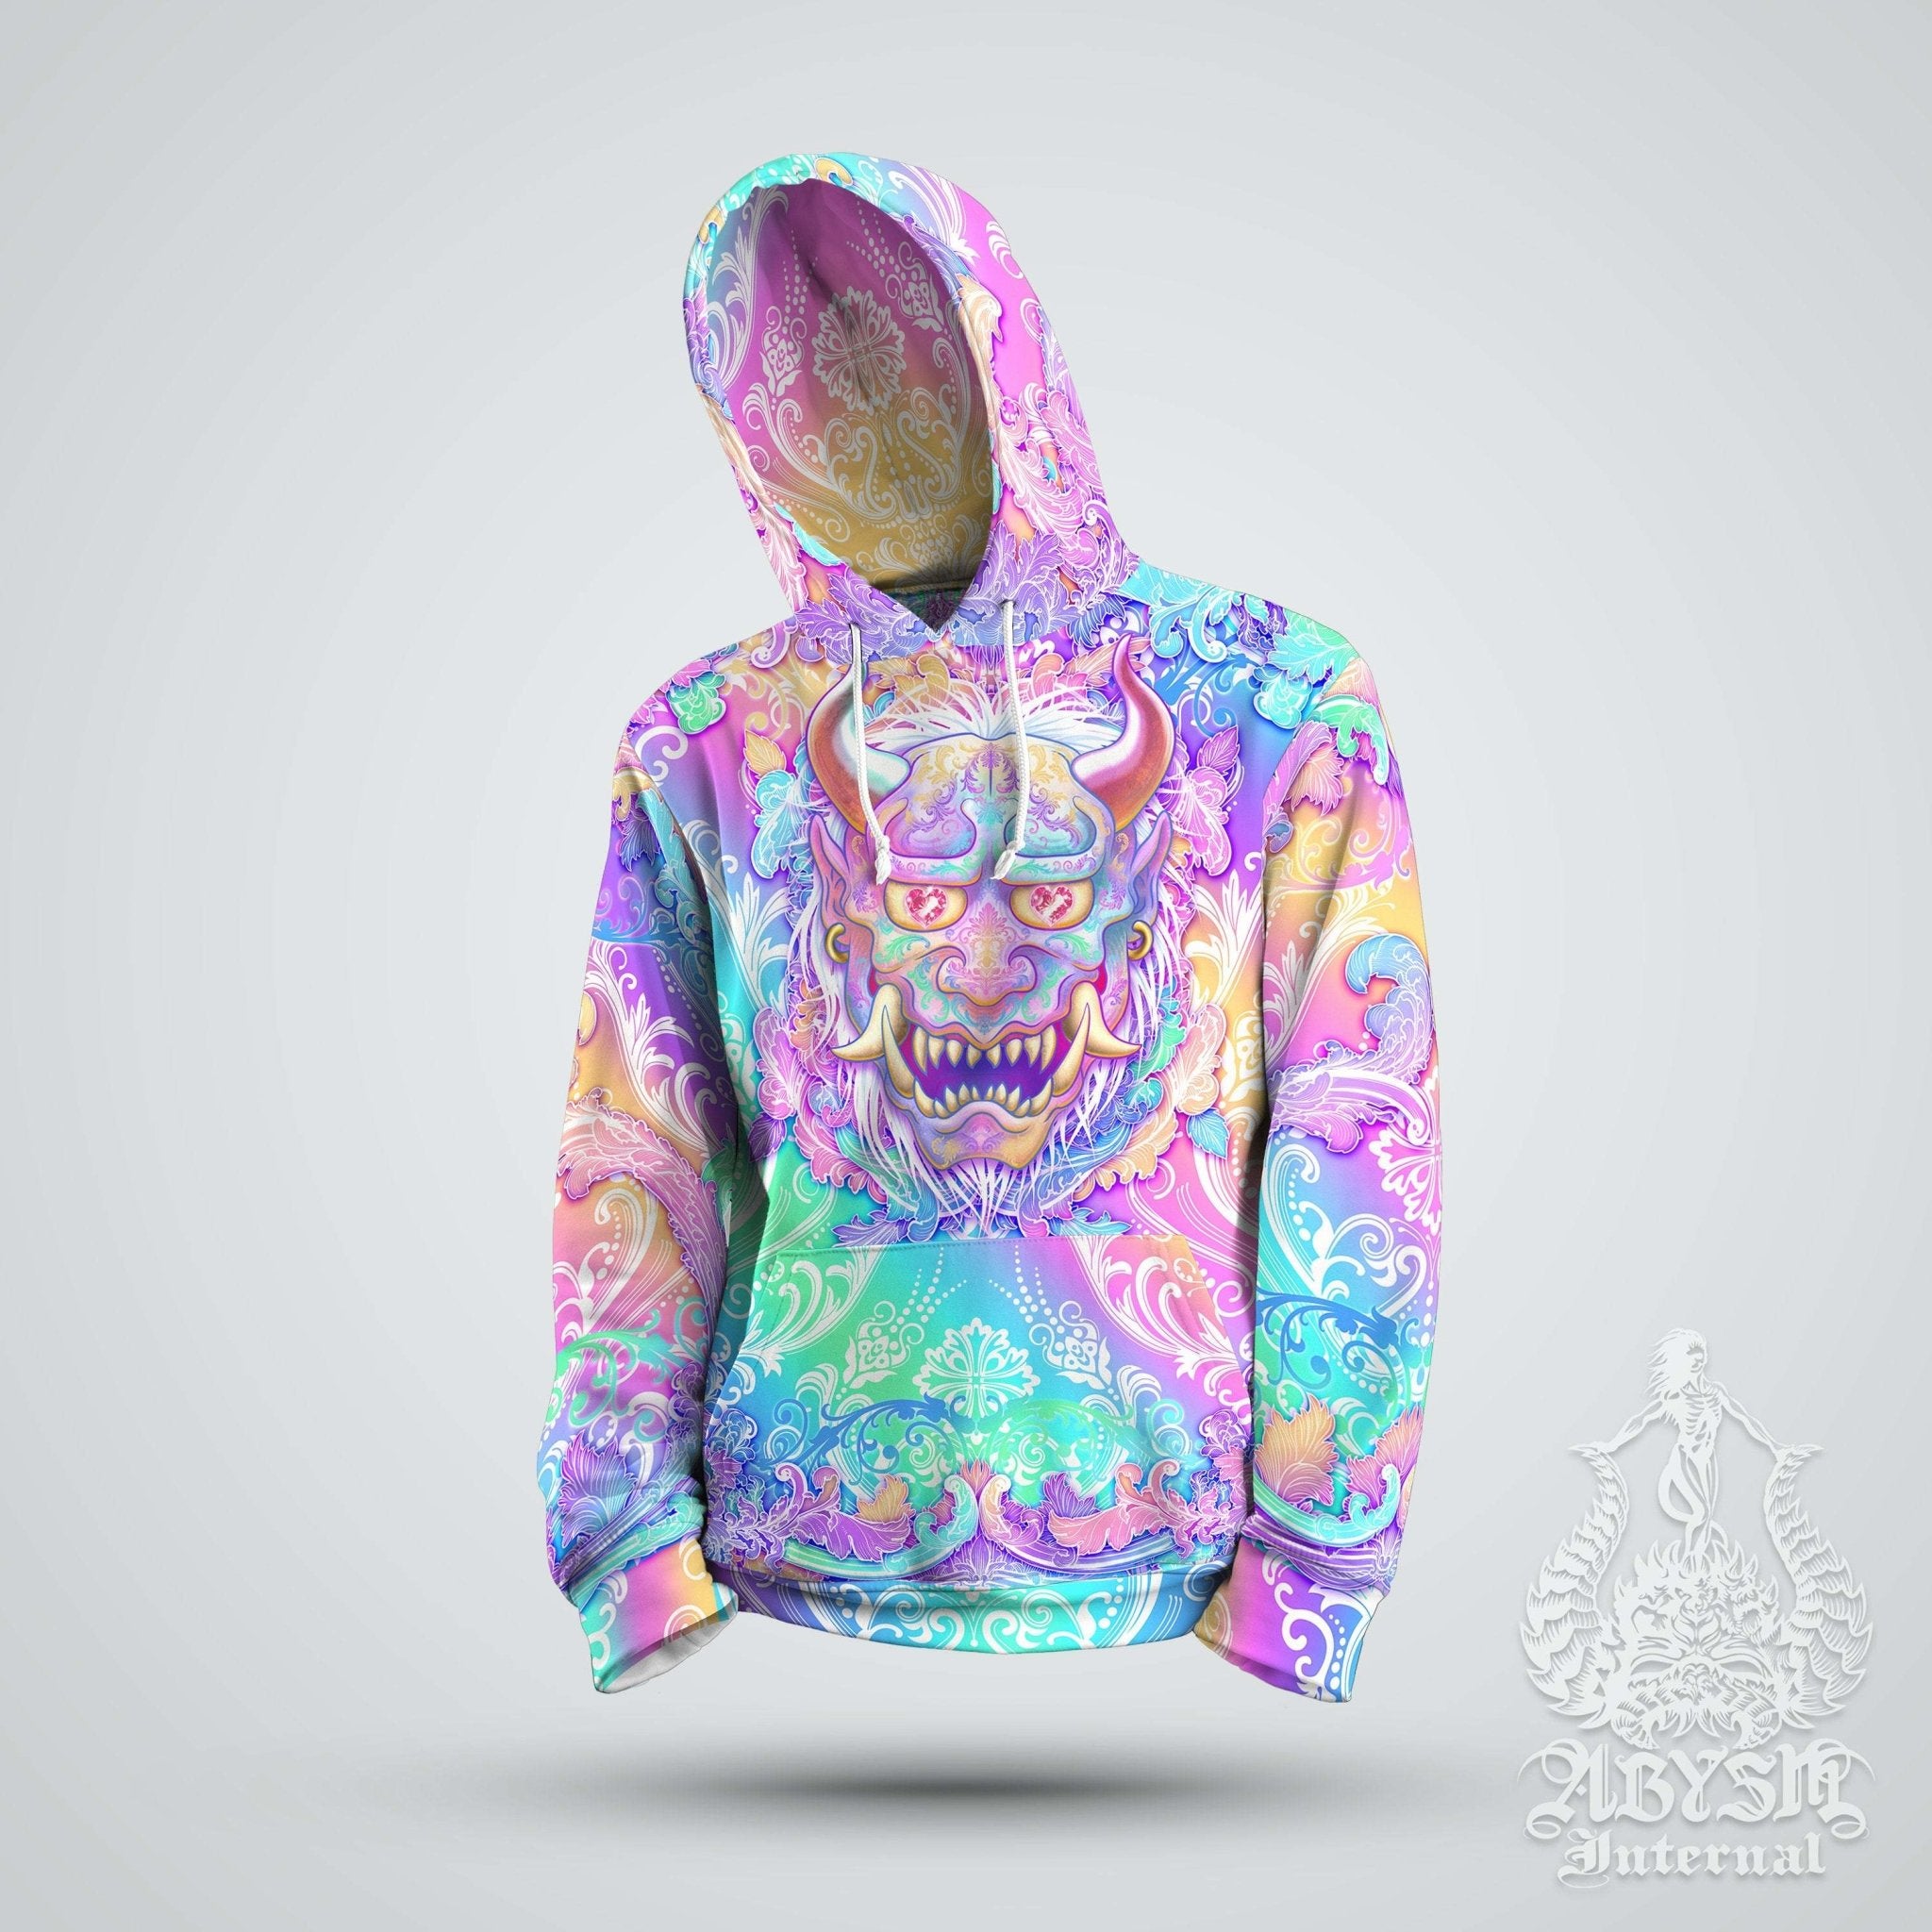 Pastel Hoodie, Japanese Streetwear, Rave Outfit, Festival Sweater, Aesthetic Clothing, Unisex - Oni Demon - Abysm Internal